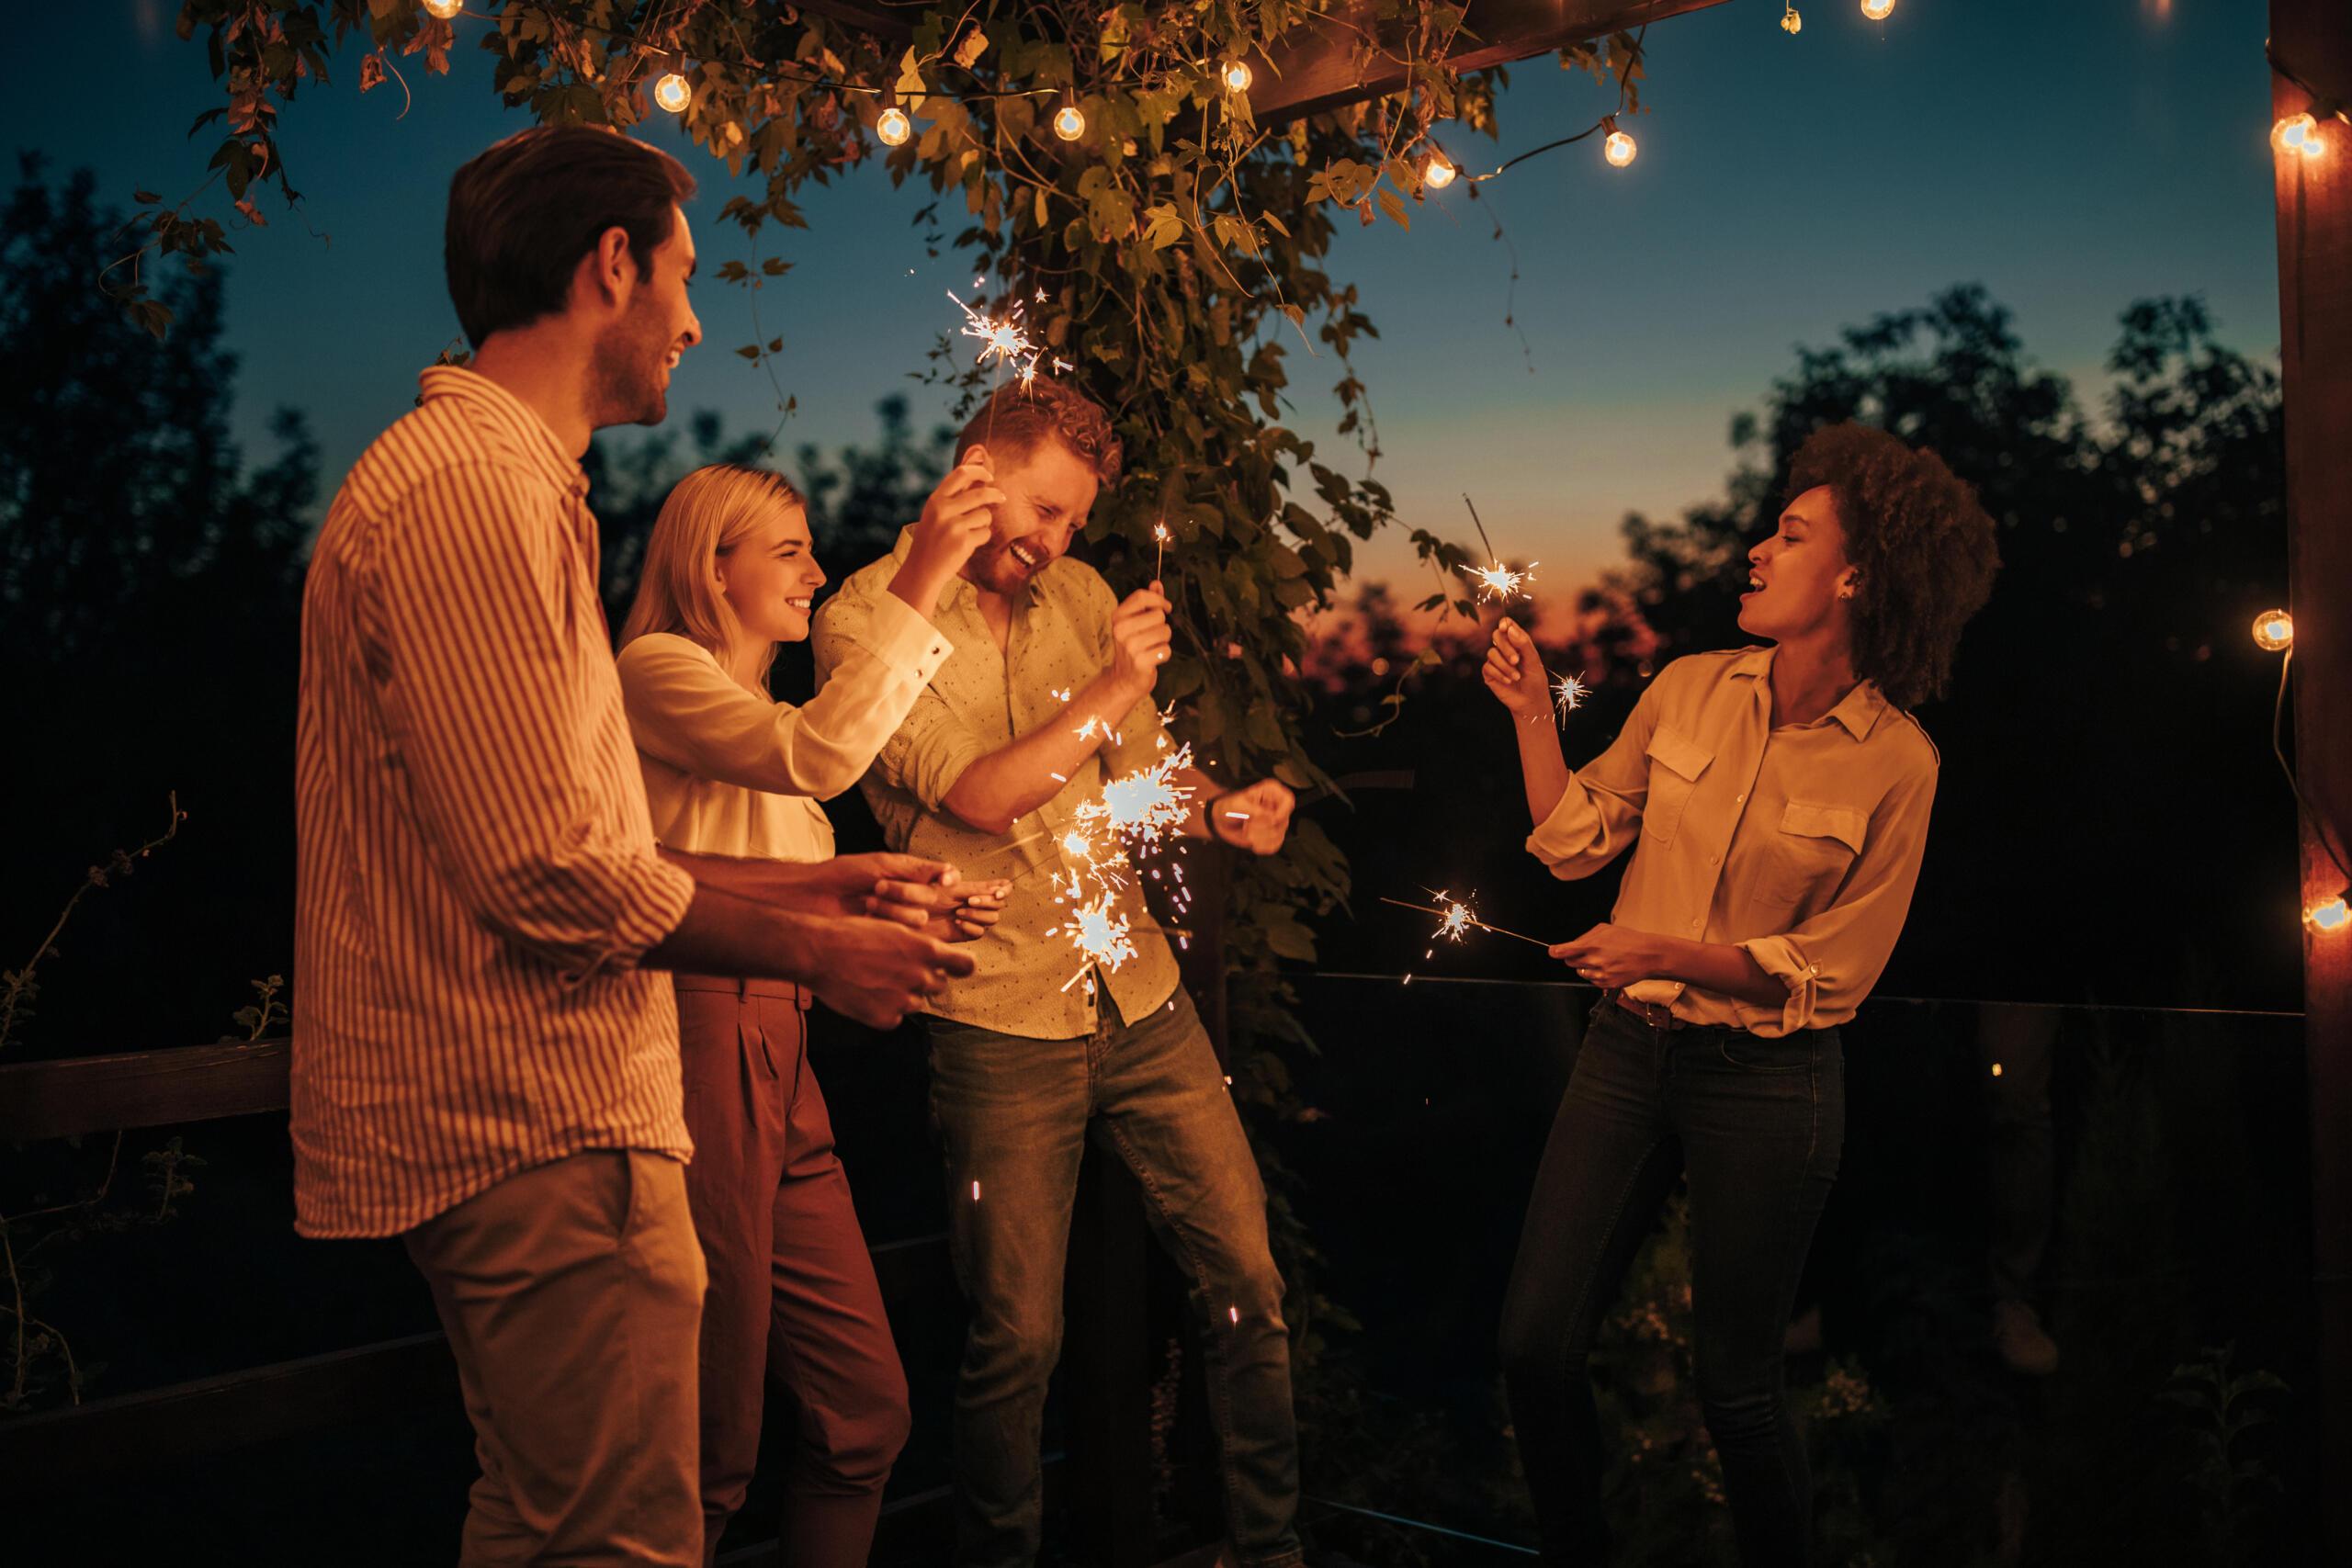 10 Fun Double Date Ideas to Try with Another Couple